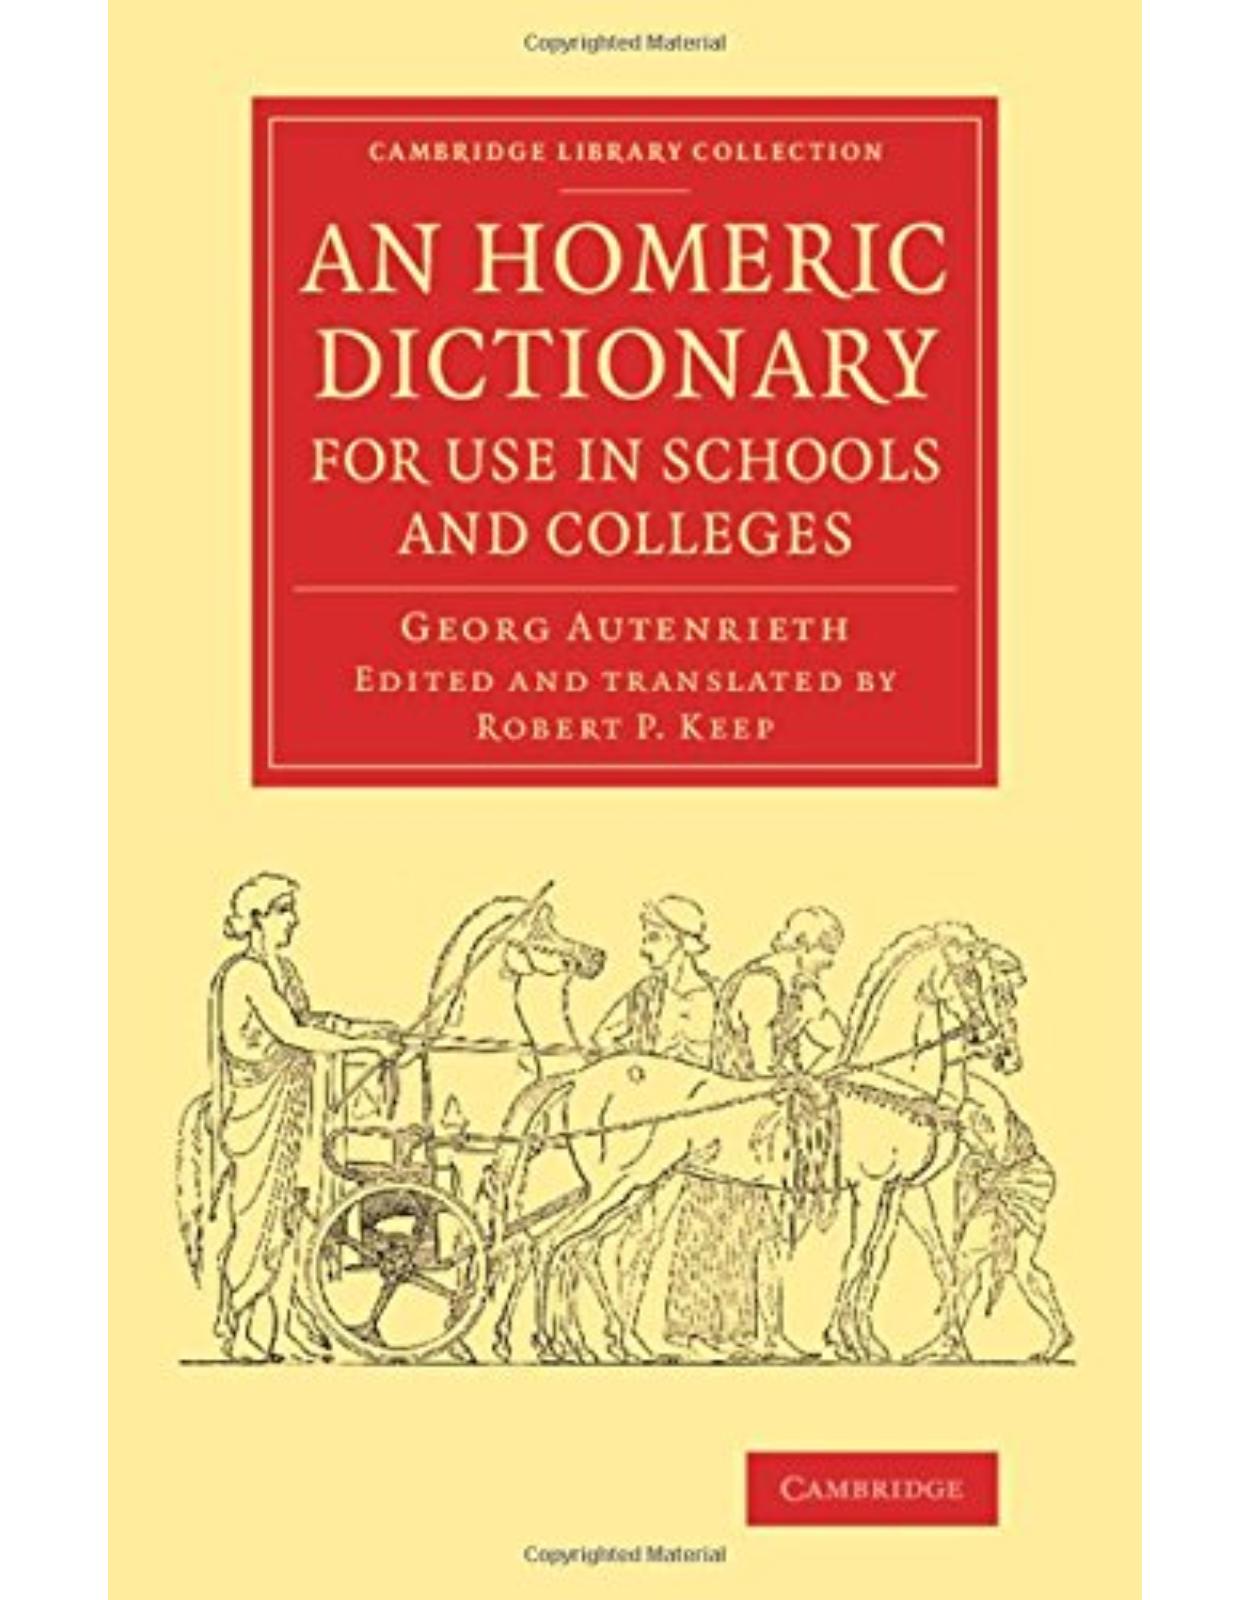 An Homeric Dictionary for Use in Schools and Colleges: From the German of Dr Georg Autenrieth (Cambridge Library Collection - Classics)